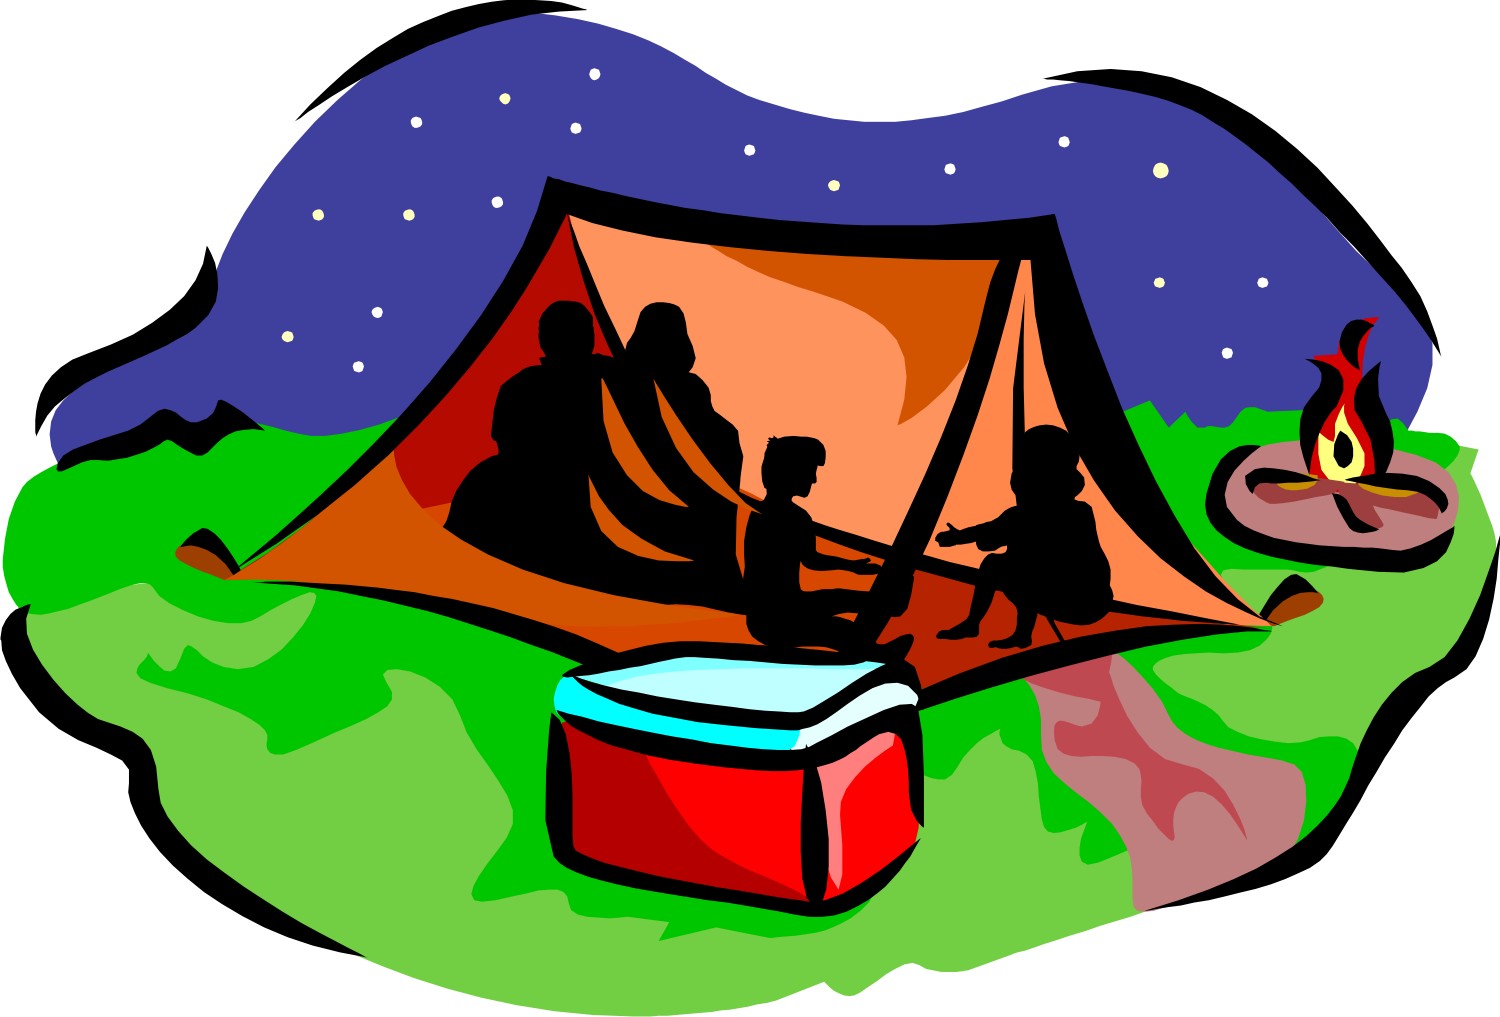 Clipart Sleeping Bag Camping - Clipart library